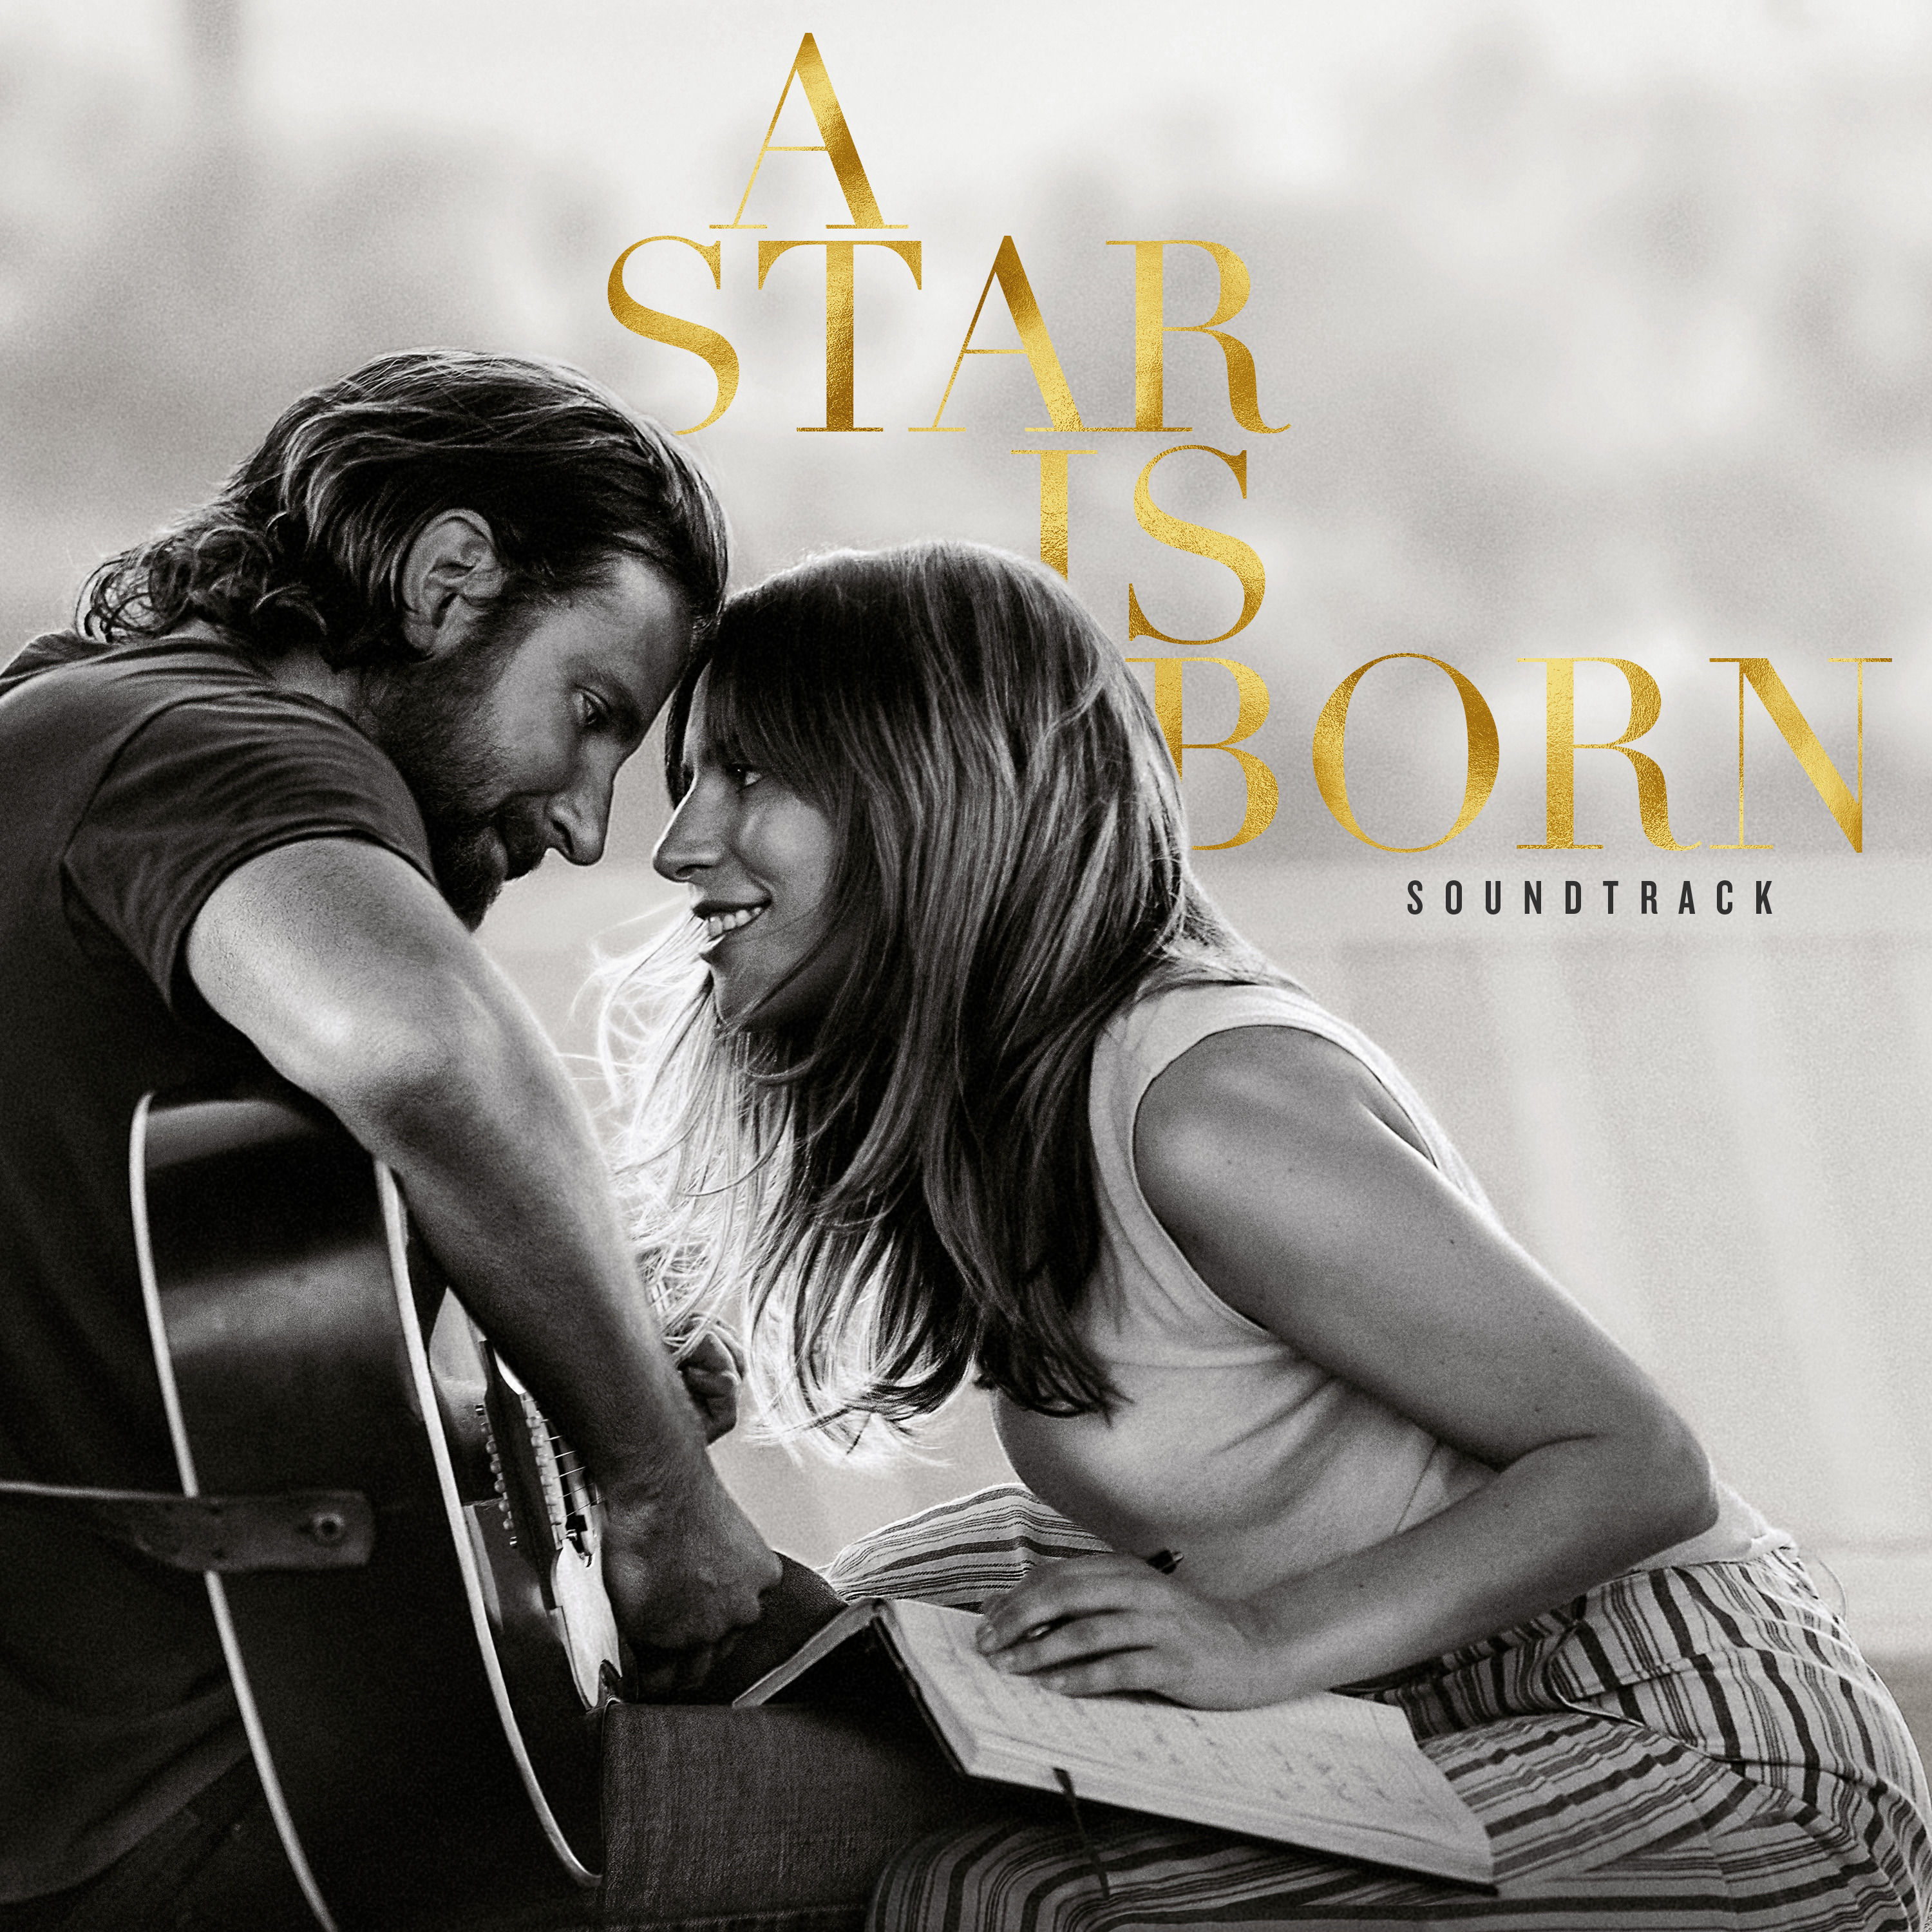 a star is born soundtrack cover art